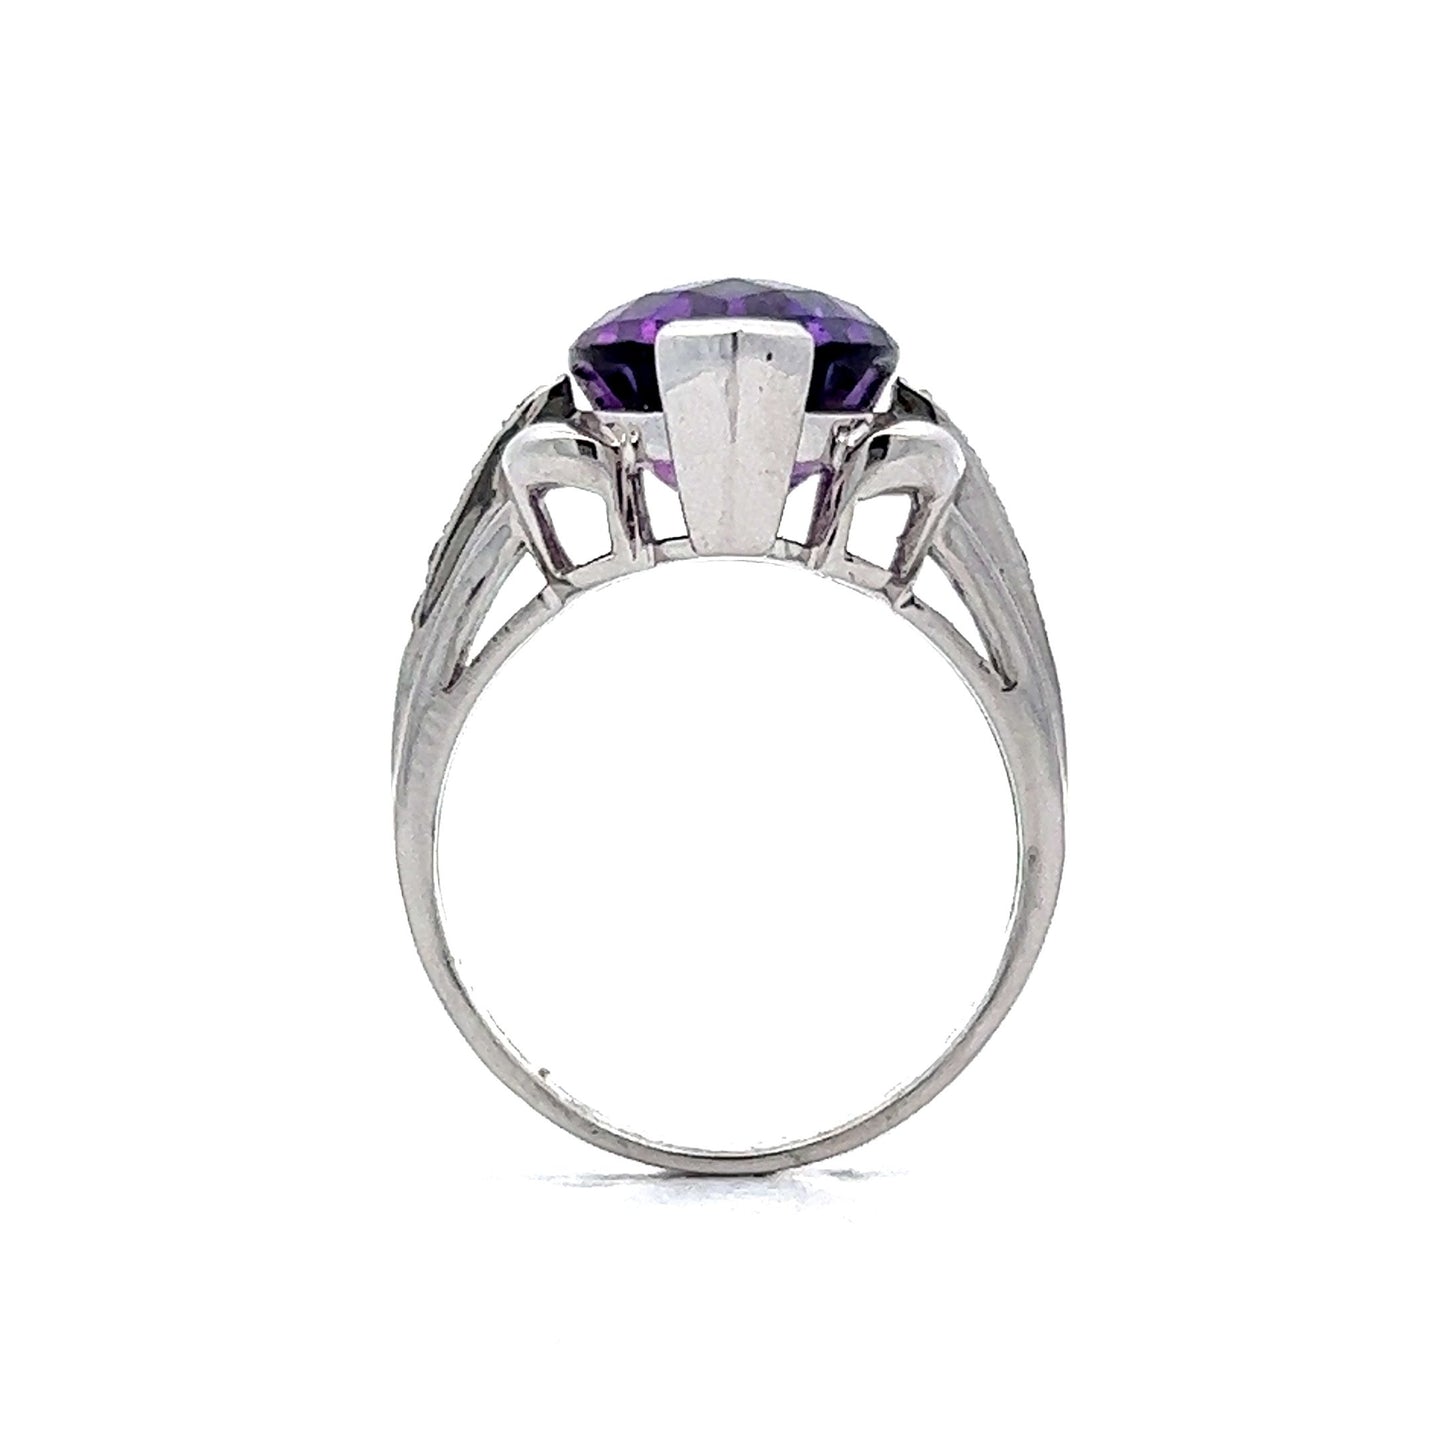 5.09 Marquise Cut Amethyst Cocktail Ring in 14k White Gold